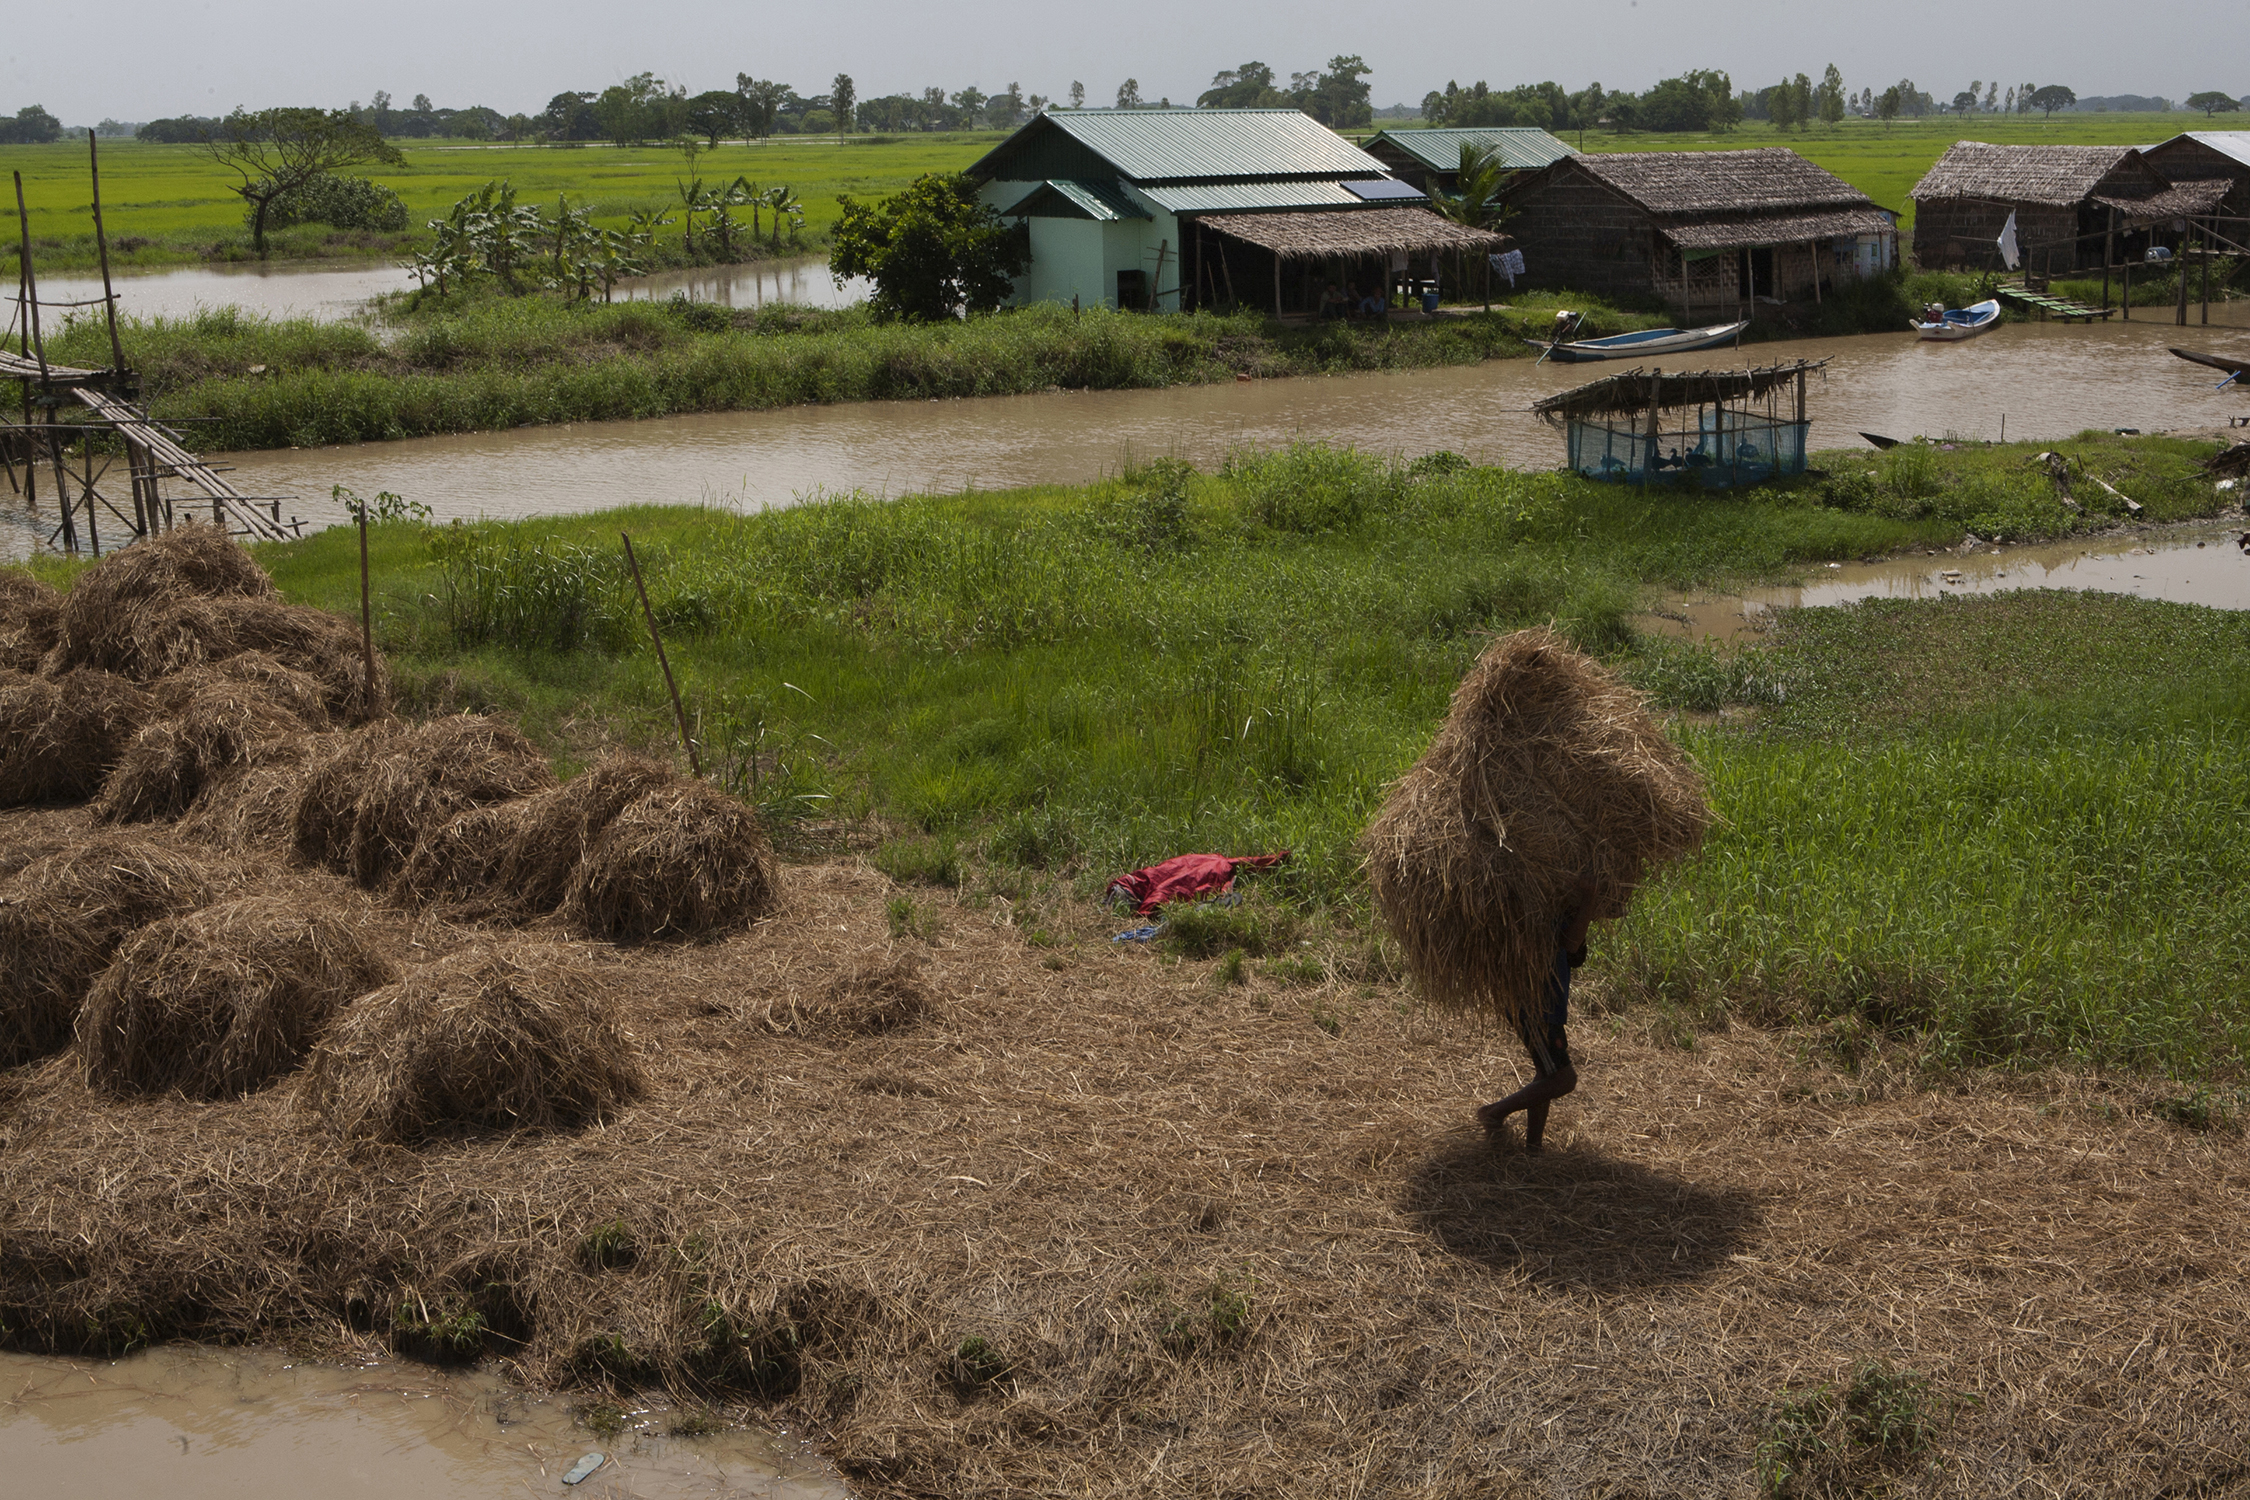  In Myanmar’s delta region, rice is the major item of commerce on the river. But cotton and other local commodities also make it’s way to local markets and Yangon for export. © Gail Fisher for Los Angeles Times 